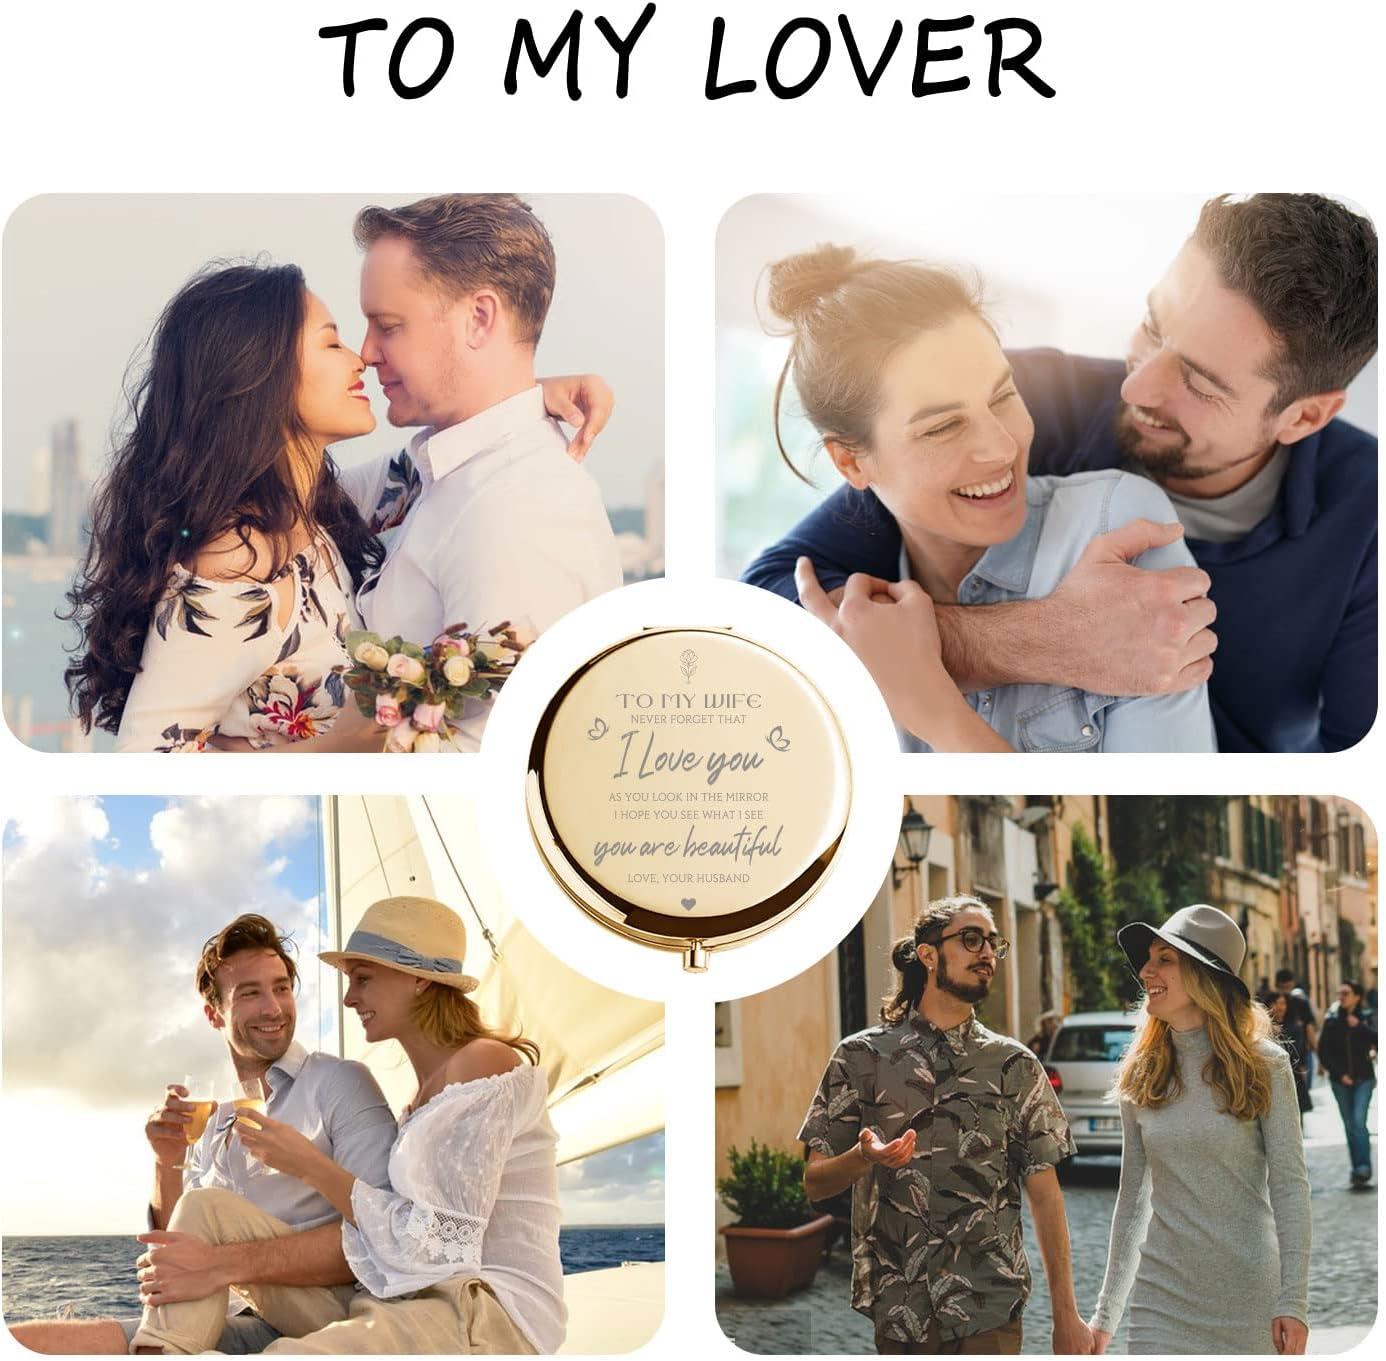 HTOTNGIFT Mothers Day Romantic Gifts for Wife Her Funny for Her Women I  Love You Wife Gifts from Husband Gold Compact Mirror Gift Ideas for Wedding  Birthday Anniversary